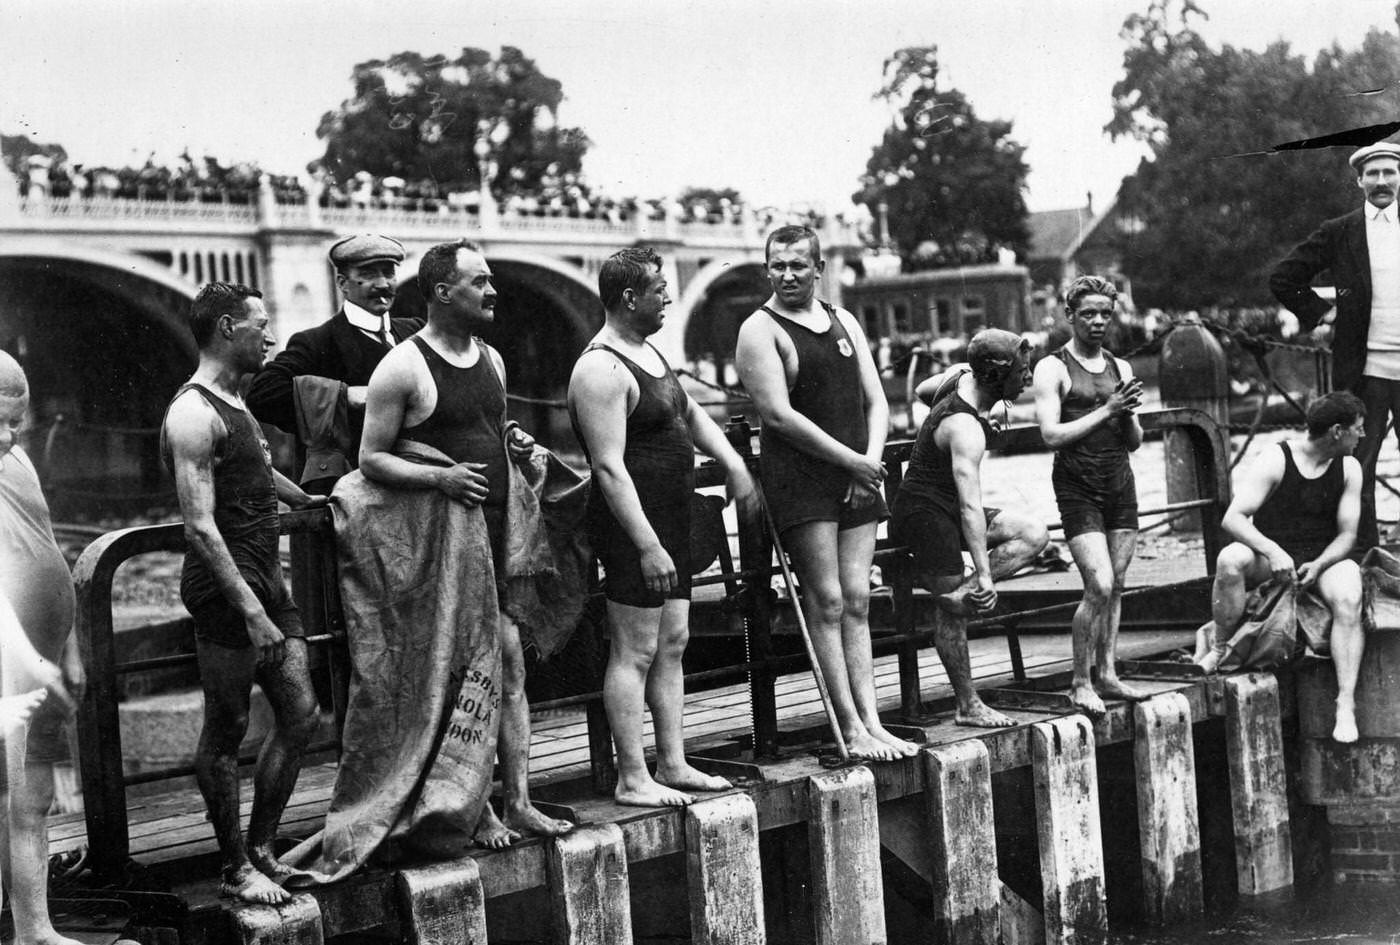 Competitors line up for the start of the Richmond to Blackfriars swimming race, 1907